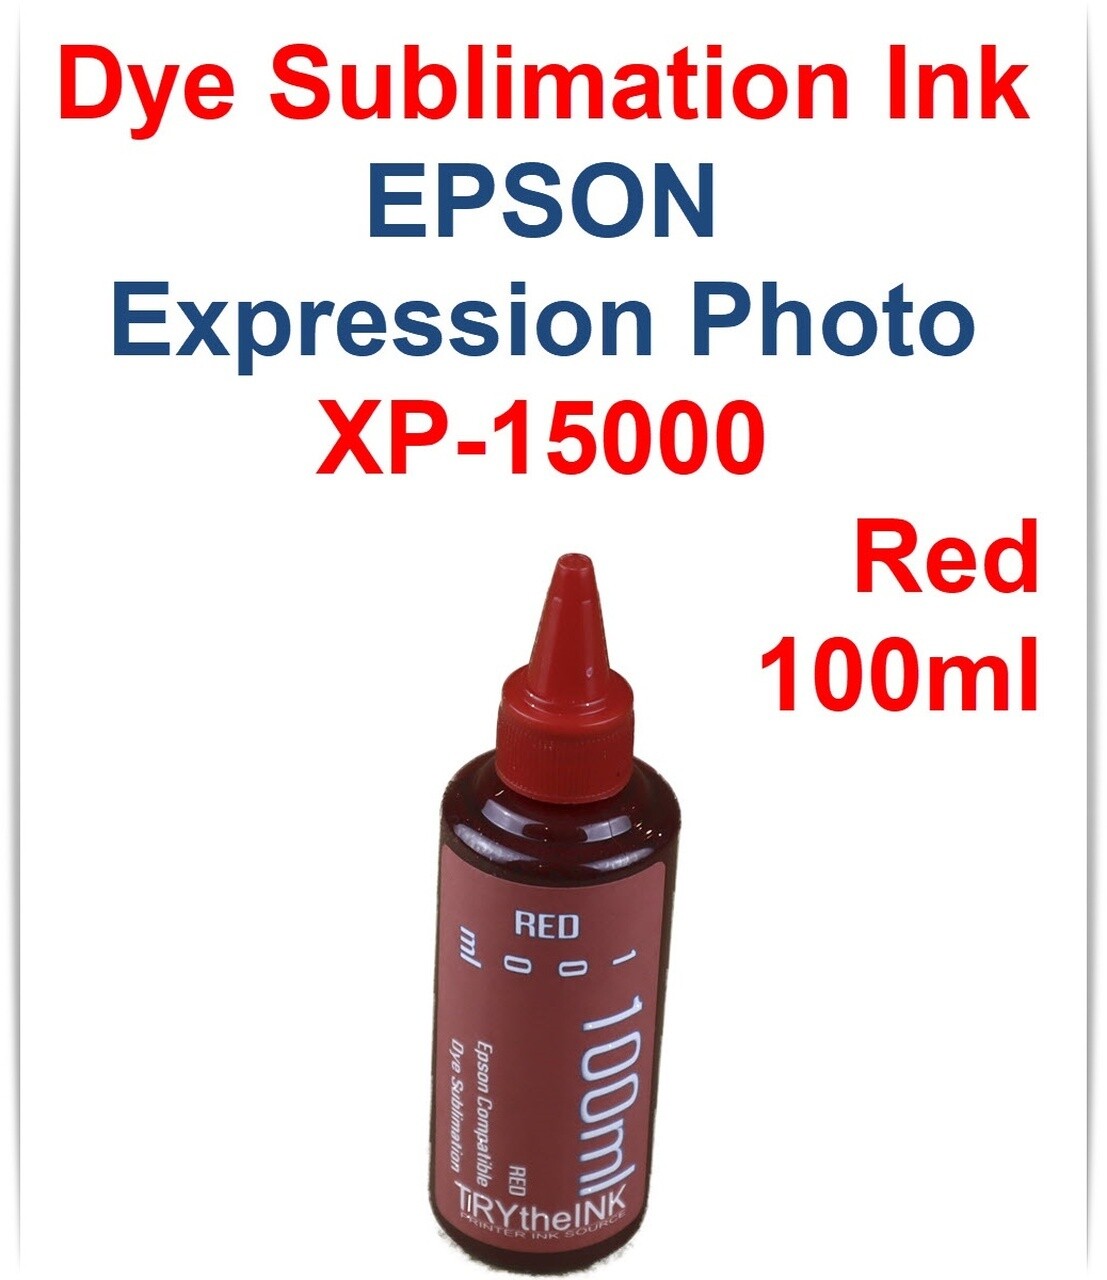 Red Dye Sublimation Ink 100ml for Epson Expression Photo HD XP-15000 printer